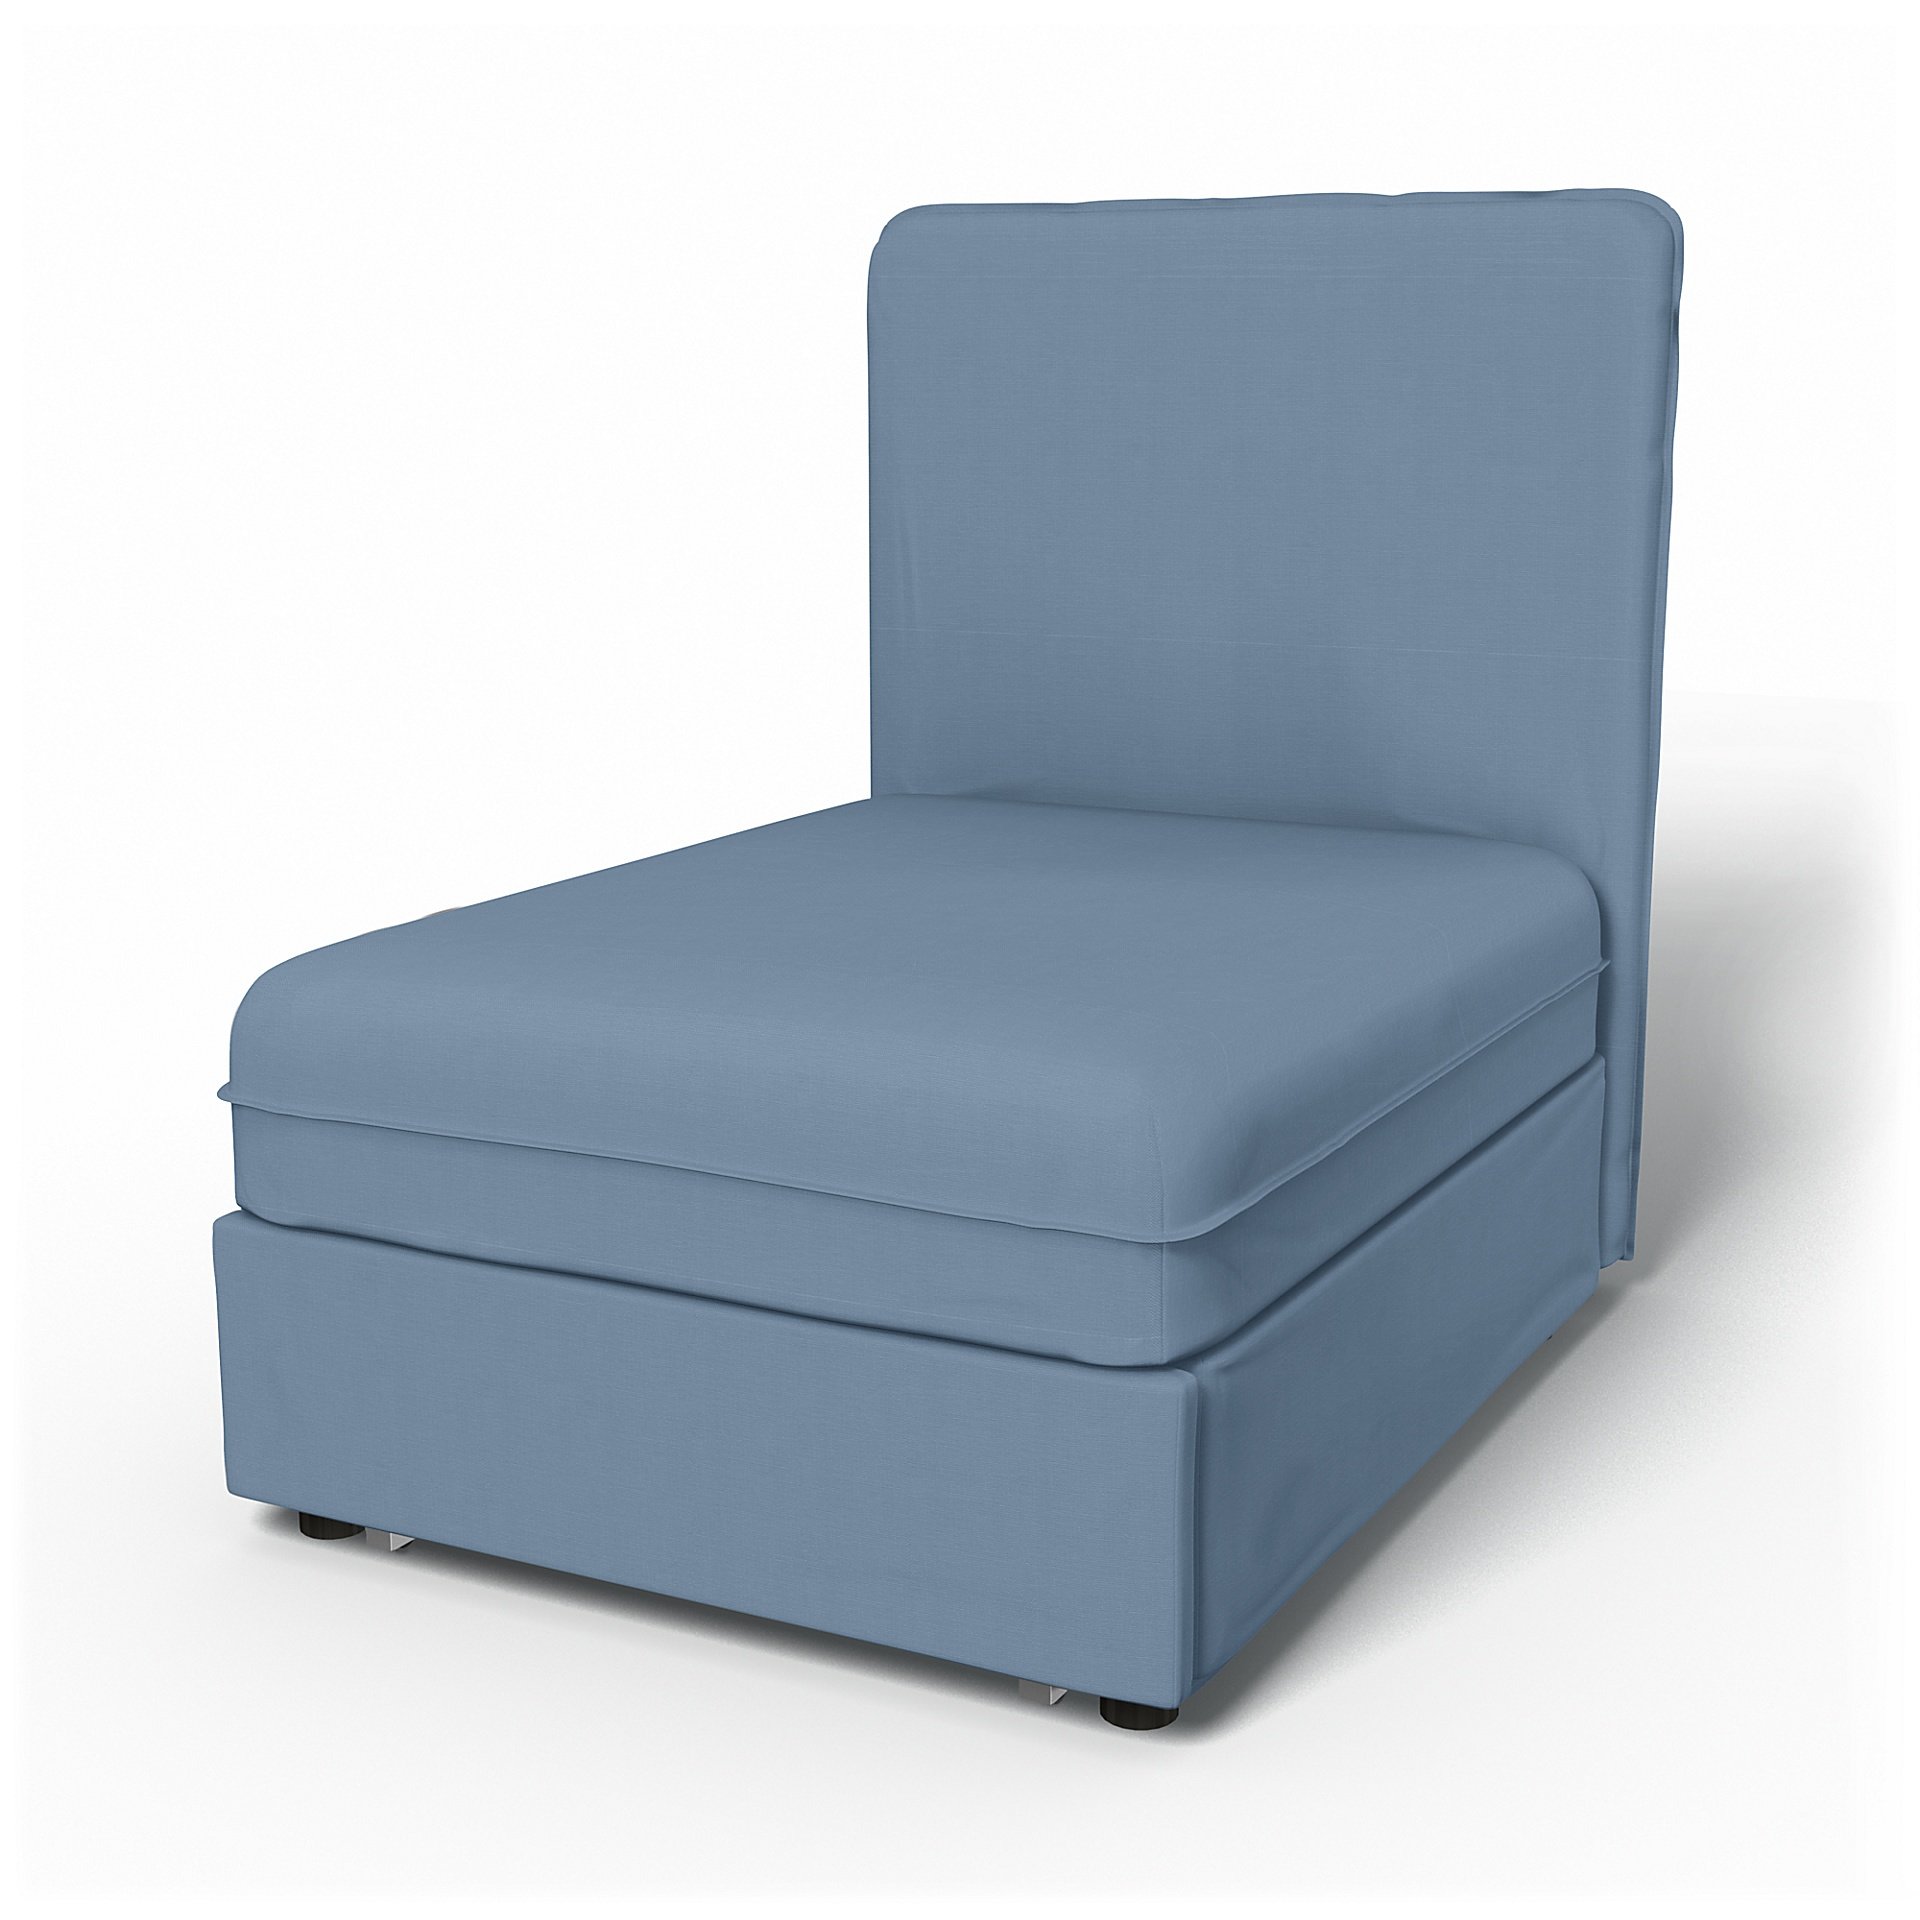 IKEA - Vallentuna Seat Module with High Back Sofa Bed Cover (80x100x46cm), Dusty Blue, Cotton - Bemz